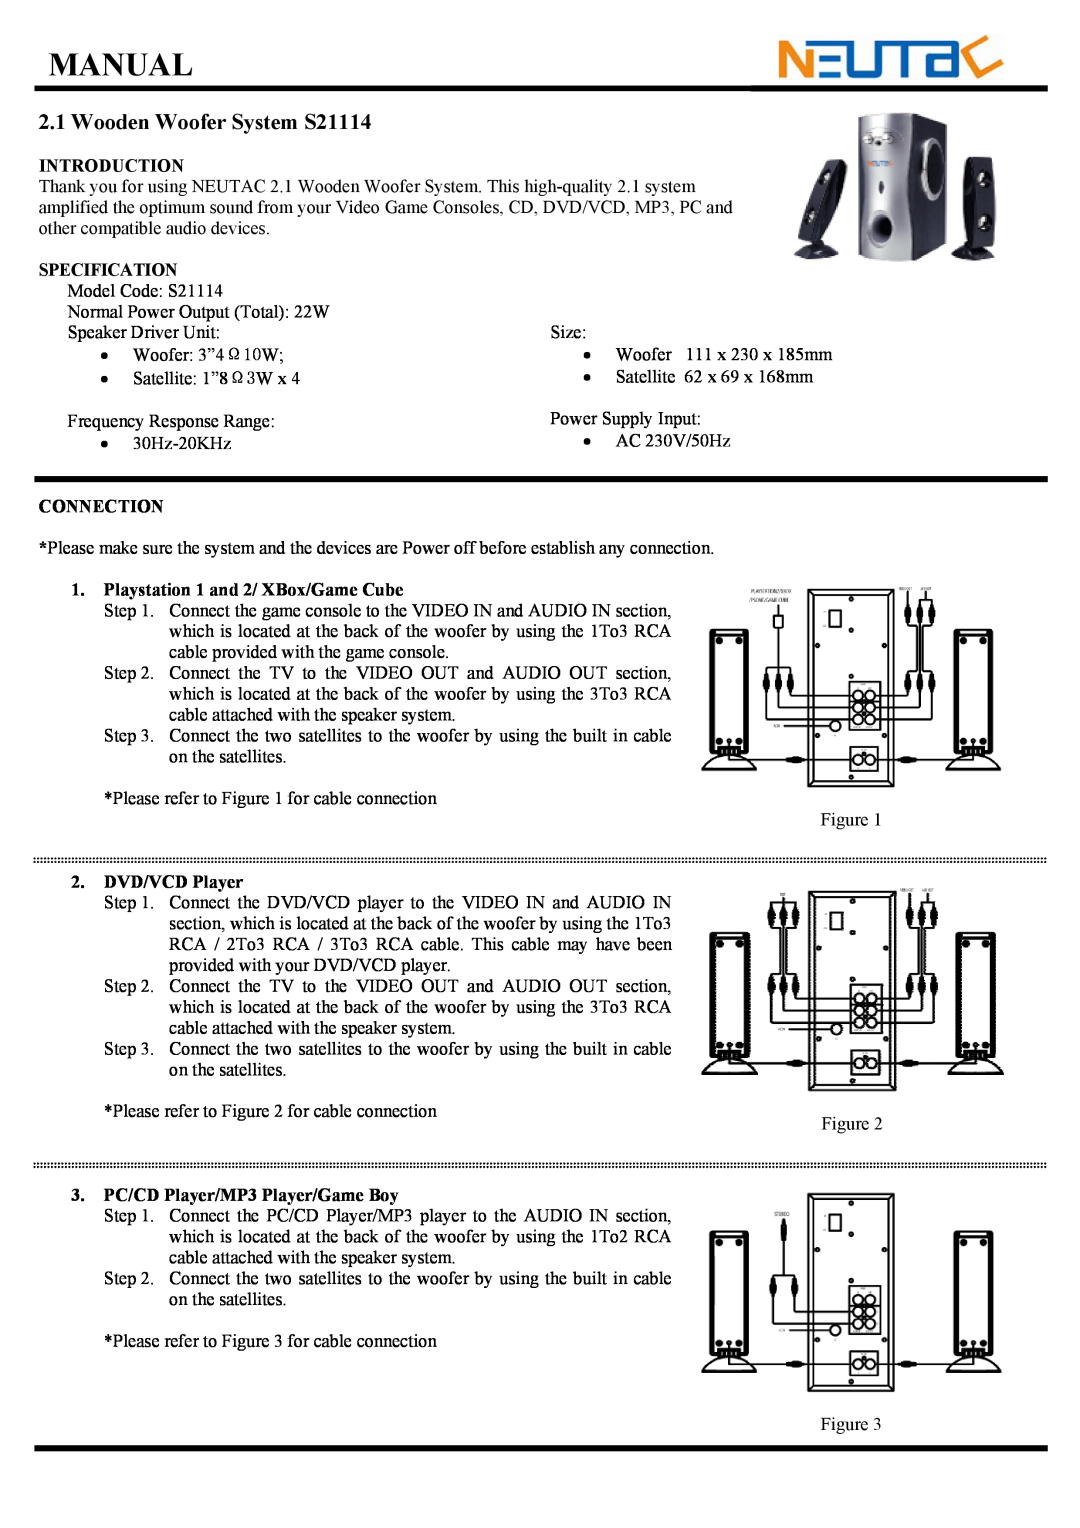 RCA S21114 manual Manual, Introduction, Specification, Connection, Playstation 1 and 2/ XBox/Game Cube, 2.DVD/VCD Player 